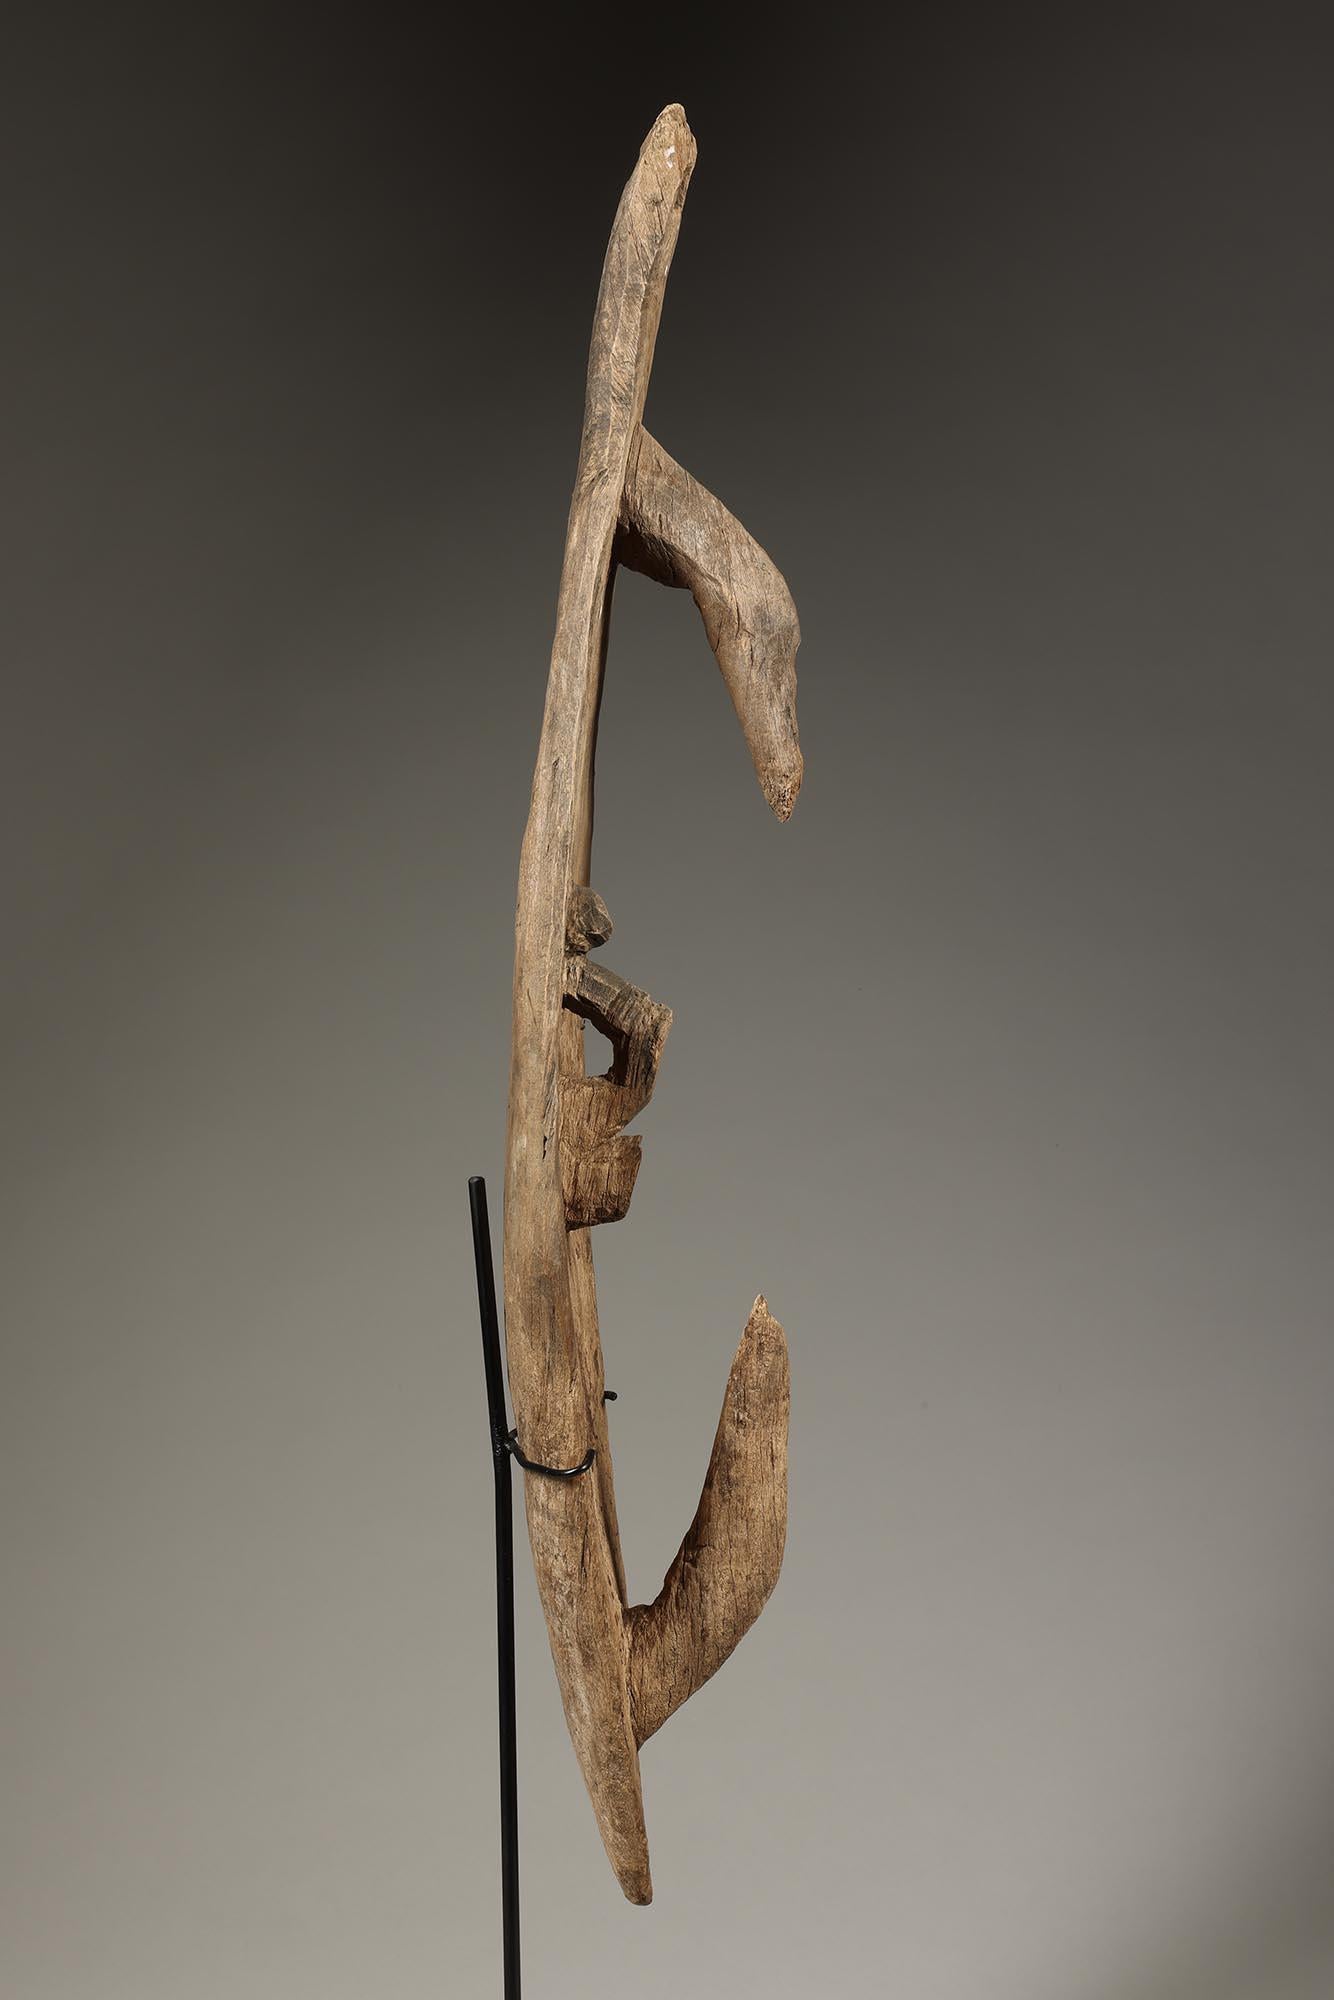 Early Papua New Guinea abstract hook figure or mask with two opposing hooks, and central looped design, Sepik River area. Some chips missing to central loops. Small hole at top for suspension.  Overall weathered eroded surface.  Pieces like this